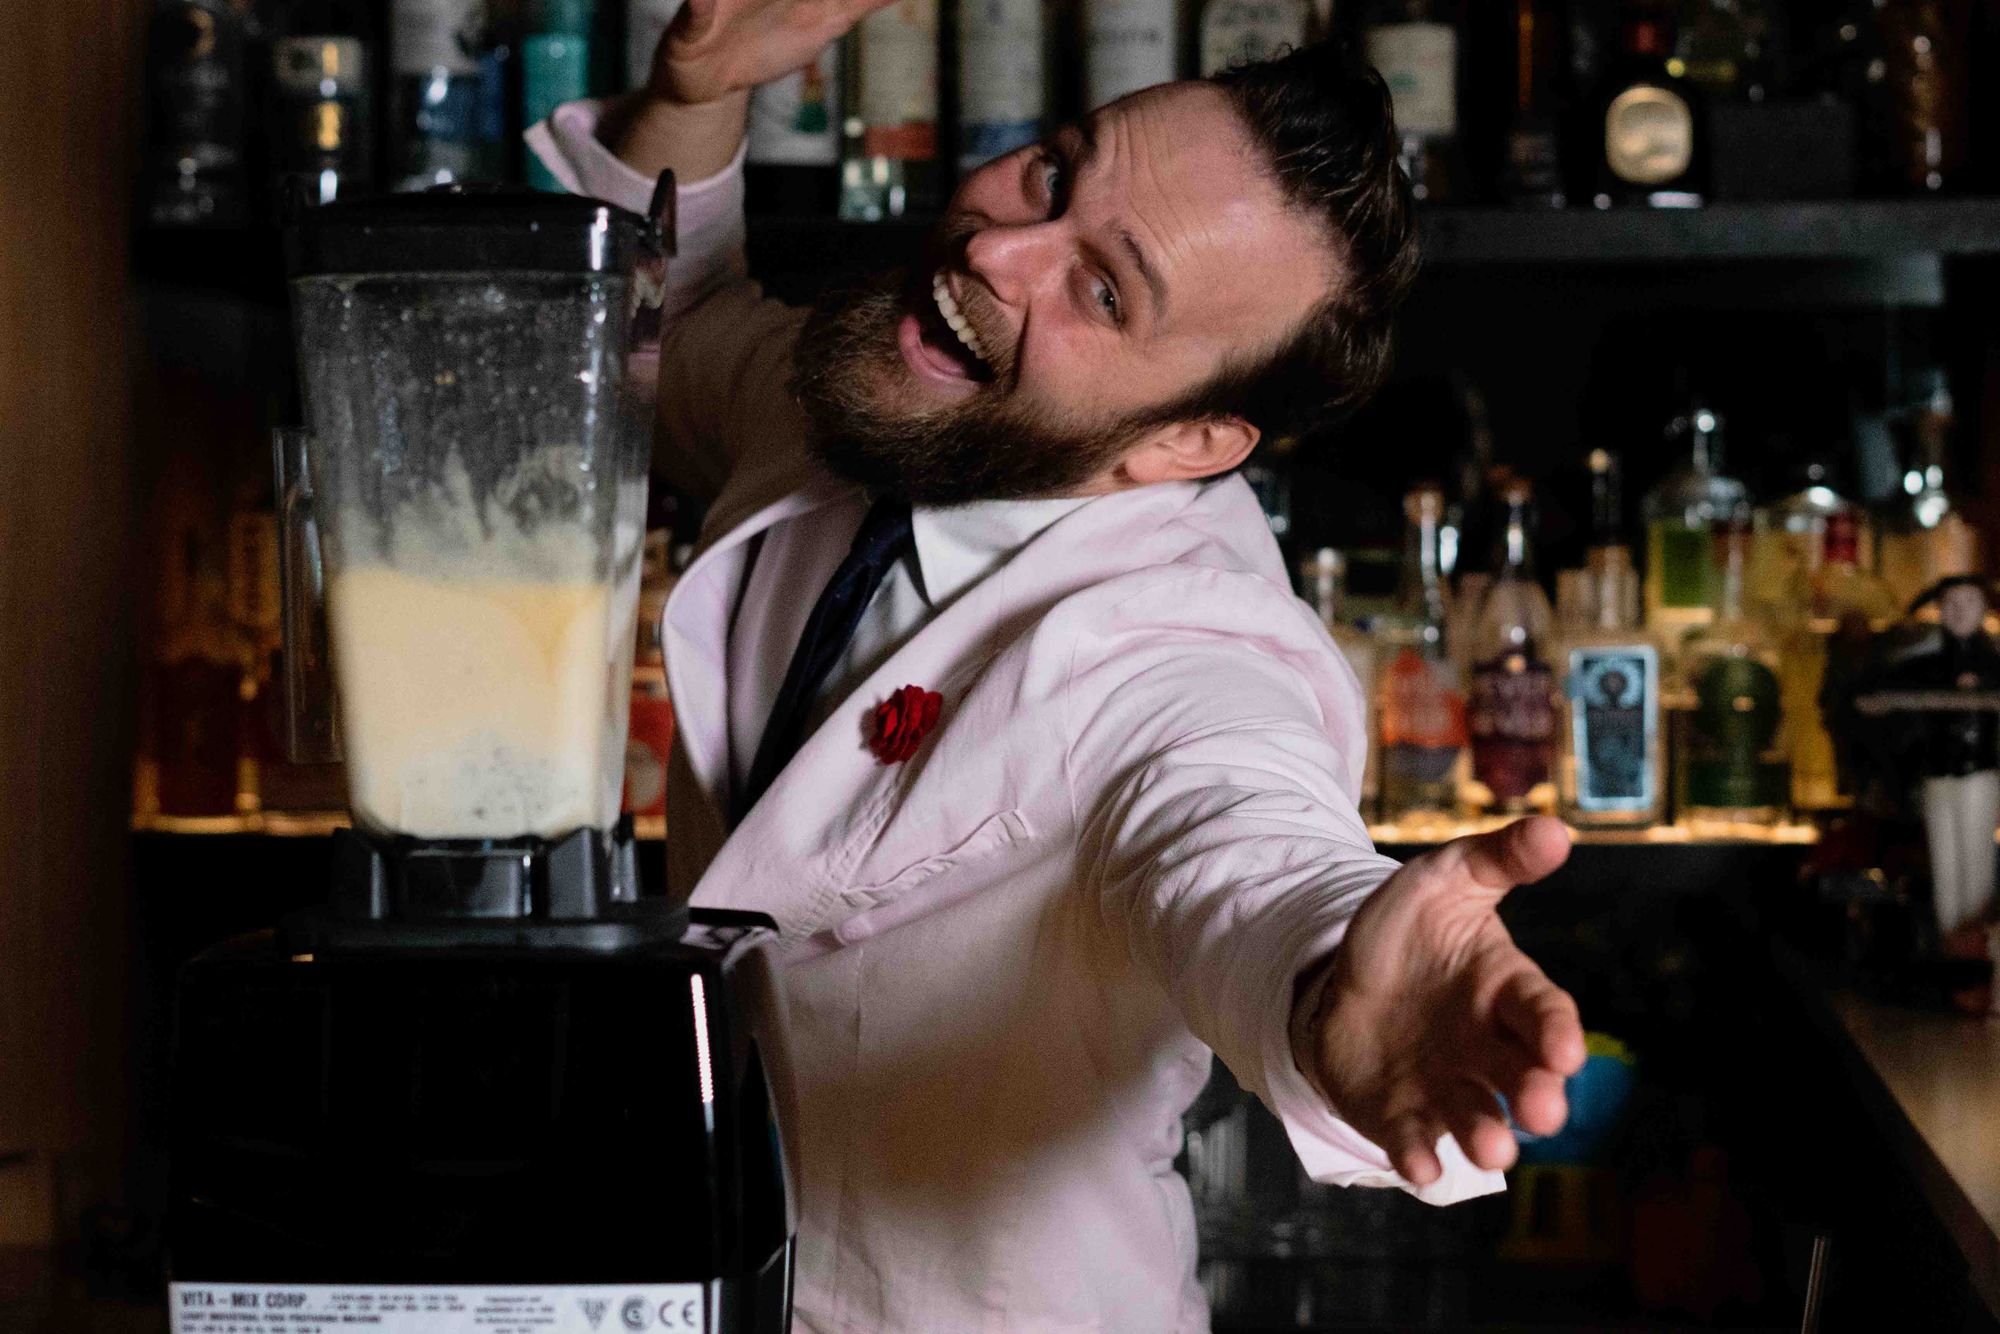 Co-owner and creative director Martin Hudák on the blender making the Dancing Queen cocktail at Maybe Sammy, Sydney. Photo: Boothby